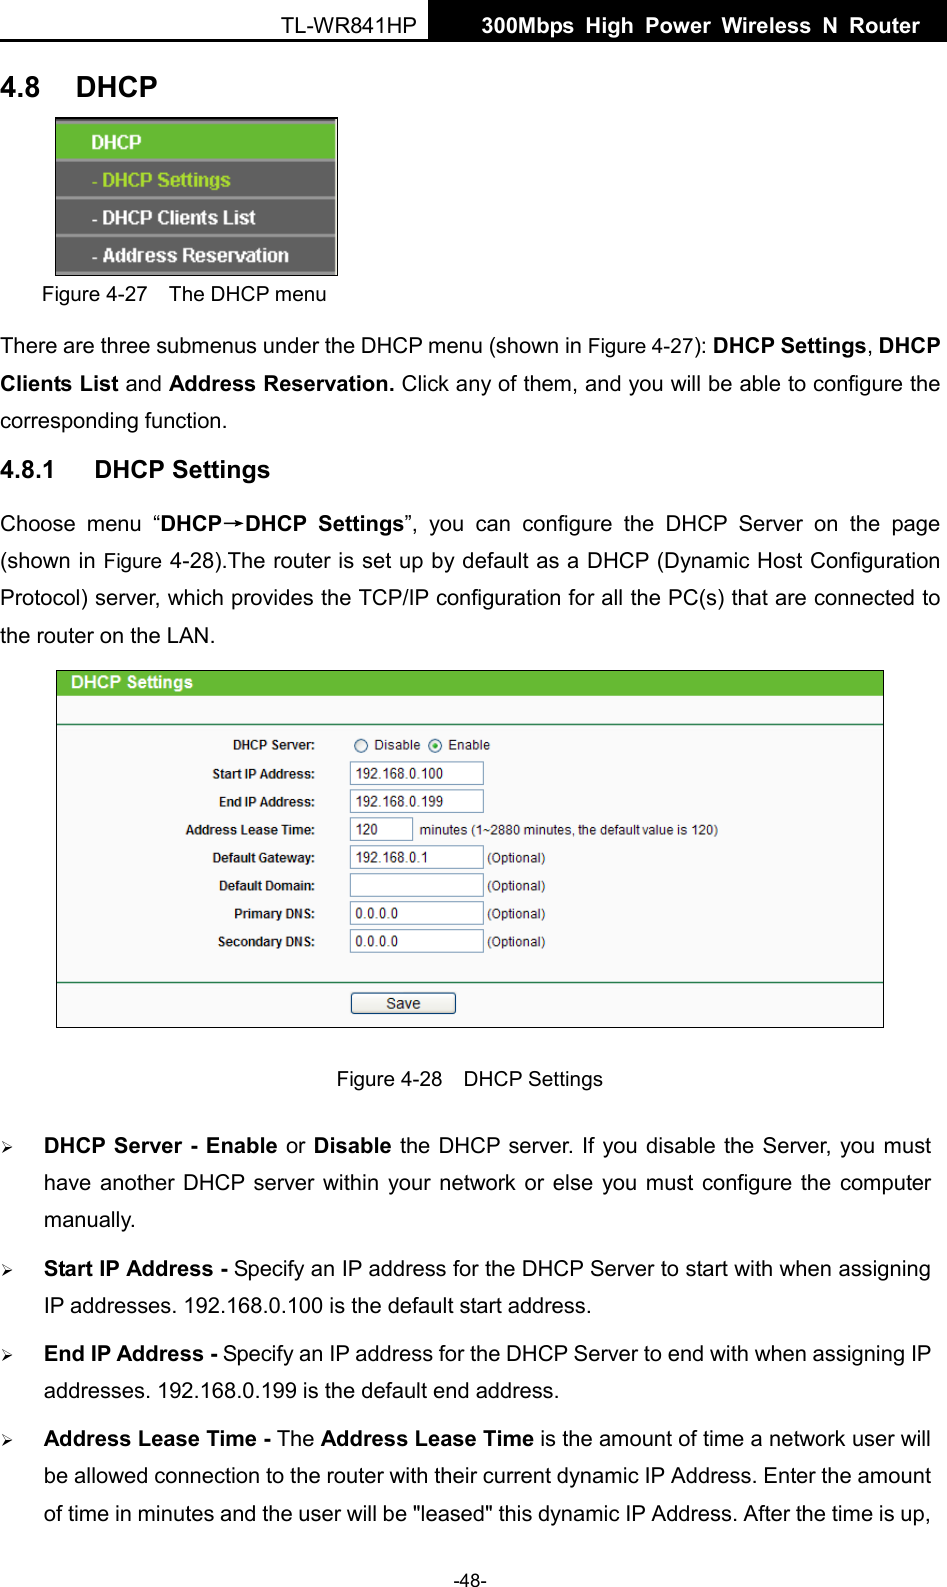  TL-WR841HP  300Mbps High Power Wireless N Router    -48- 4.8 DHCP  Figure 4-27  The DHCP menu There are three submenus under the DHCP menu (shown in Figure 4-27): DHCP Settings, DHCP Clients List and Address Reservation. Click any of them, and you will be able to configure the corresponding function. 4.8.1 DHCP Settings Choose menu “DHCP→DHCP Settings”, you can configure the DHCP Server on the page (shown in Figure 4-28).The router is set up by default as a DHCP (Dynamic Host Configuration Protocol) server, which provides the TCP/IP configuration for all the PC(s) that are connected to the router on the LAN.    Figure 4-28  DHCP Settings  DHCP Server - Enable or Disable the DHCP server. If you disable the Server, you must have another DHCP server within your network or else you must configure the computer manually.  Start IP Address - Specify an IP address for the DHCP Server to start with when assigning IP addresses. 192.168.0.100 is the default start address.  End IP Address - Specify an IP address for the DHCP Server to end with when assigning IP addresses. 192.168.0.199 is the default end address.  Address Lease Time - The Address Lease Time is the amount of time a network user will be allowed connection to the router with their current dynamic IP Address. Enter the amount of time in minutes and the user will be &quot;leased&quot; this dynamic IP Address. After the time is up, 